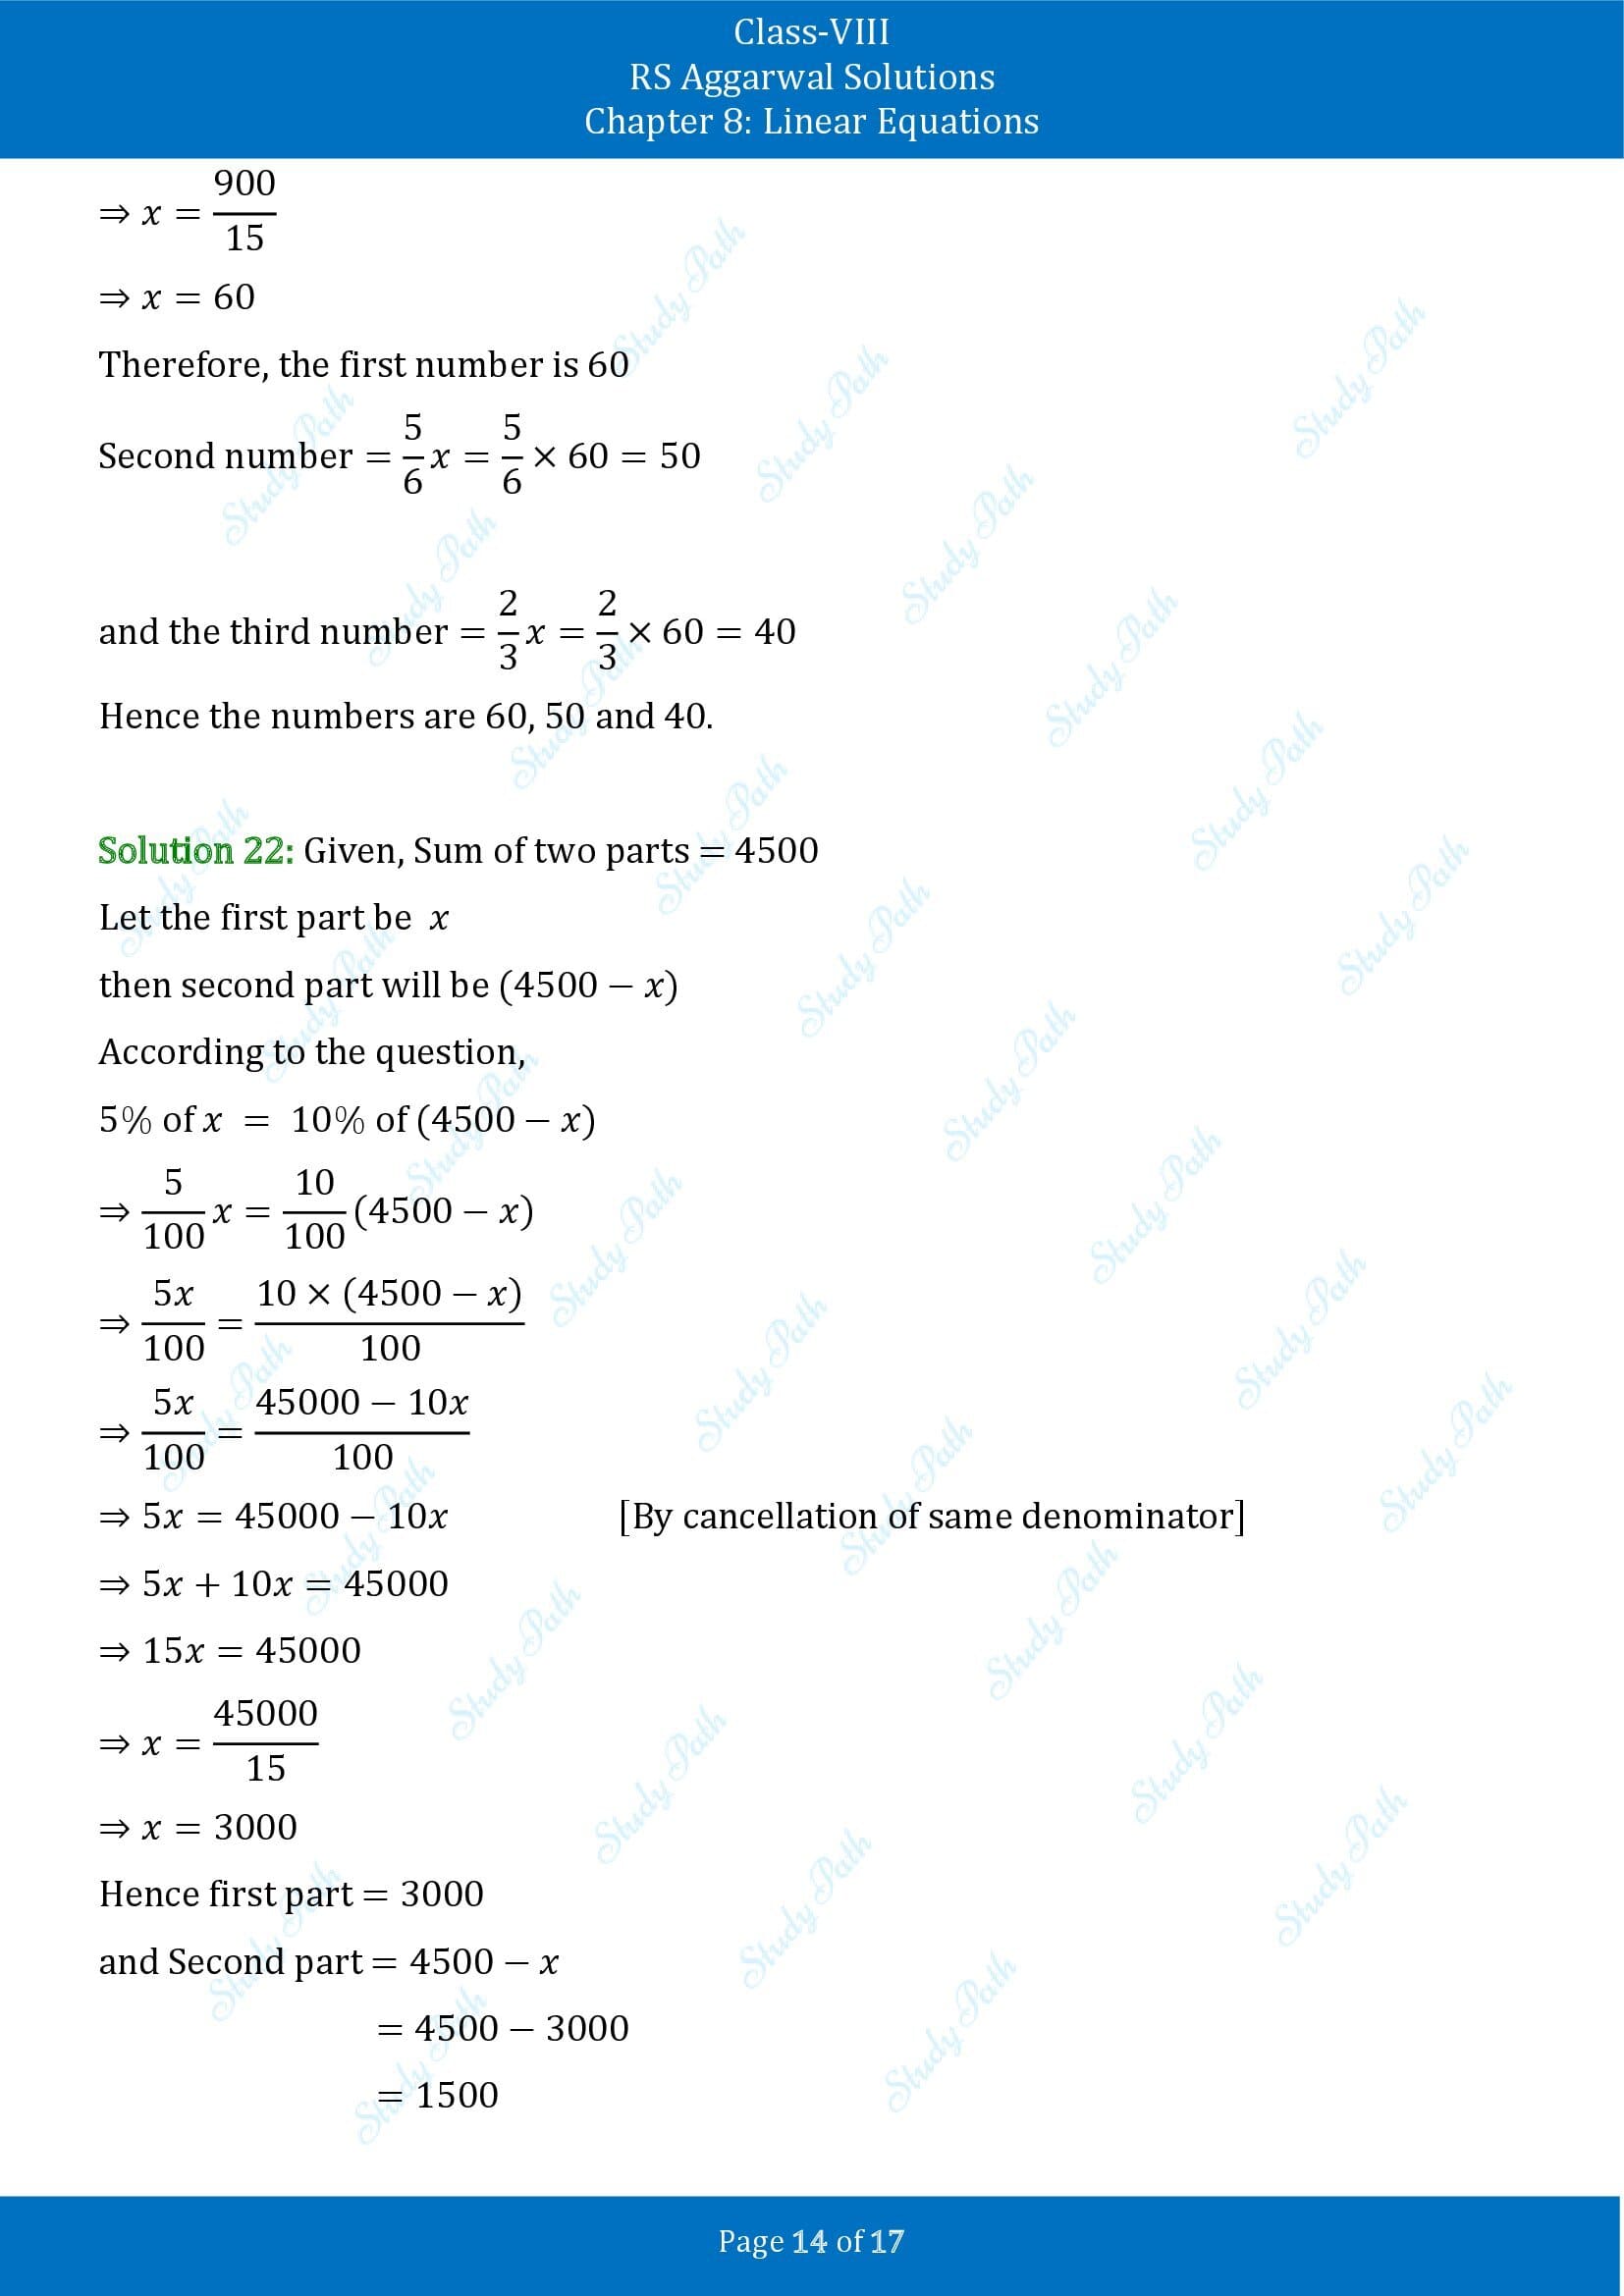 RS Aggarwal Solutions Class 8 Chapter 8 Linear Equations Exercise 8B 00014